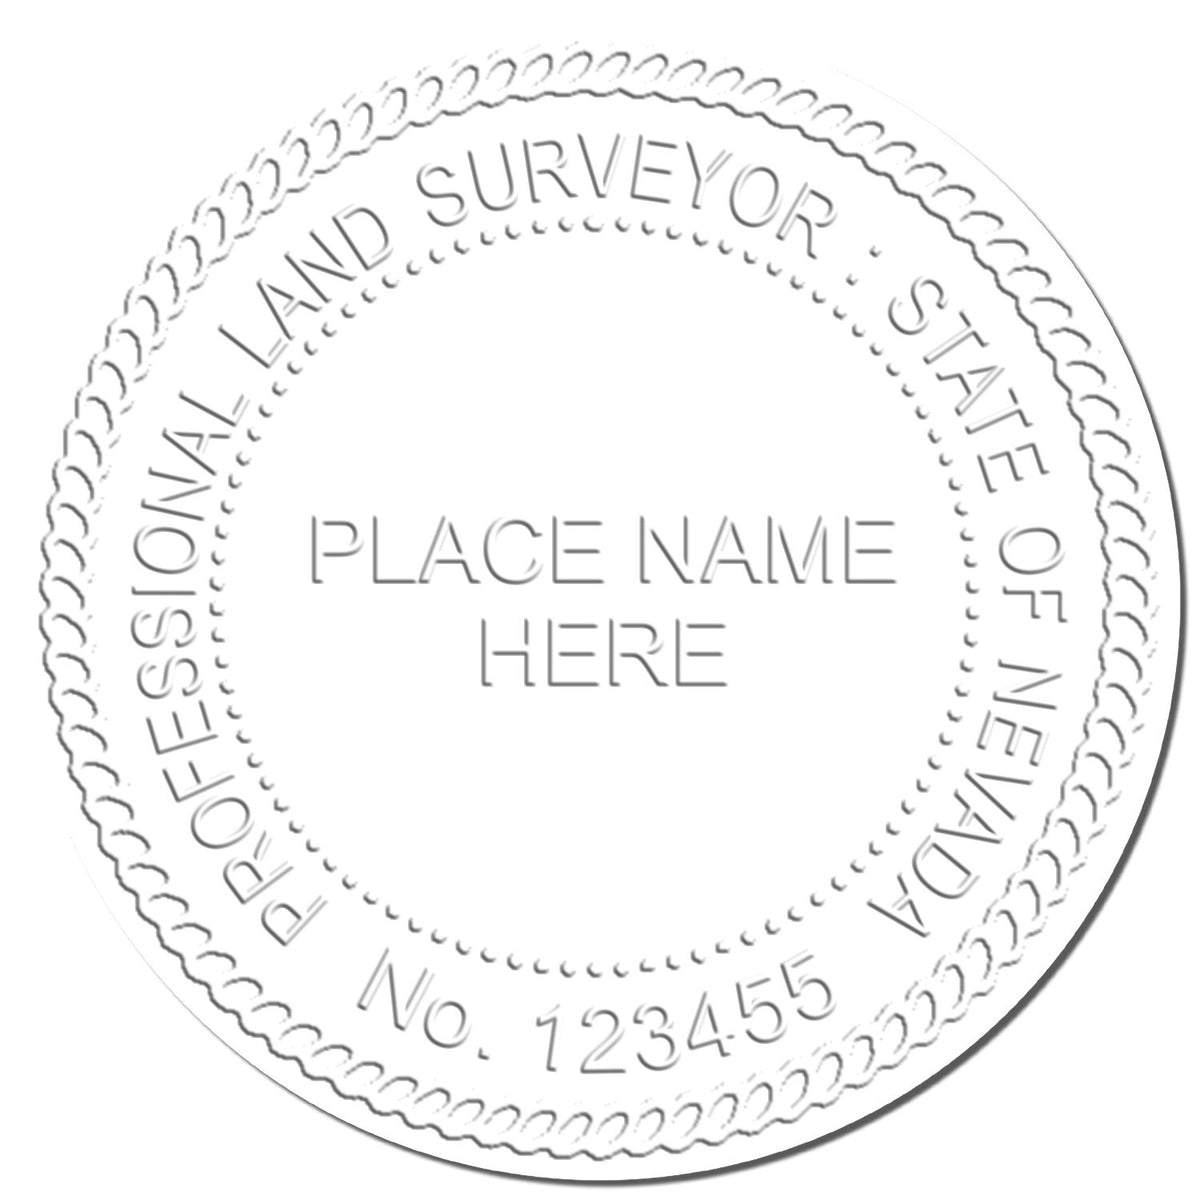 This paper is stamped with a sample imprint of the Nevada Desk Surveyor Seal Embosser, signifying its quality and reliability.